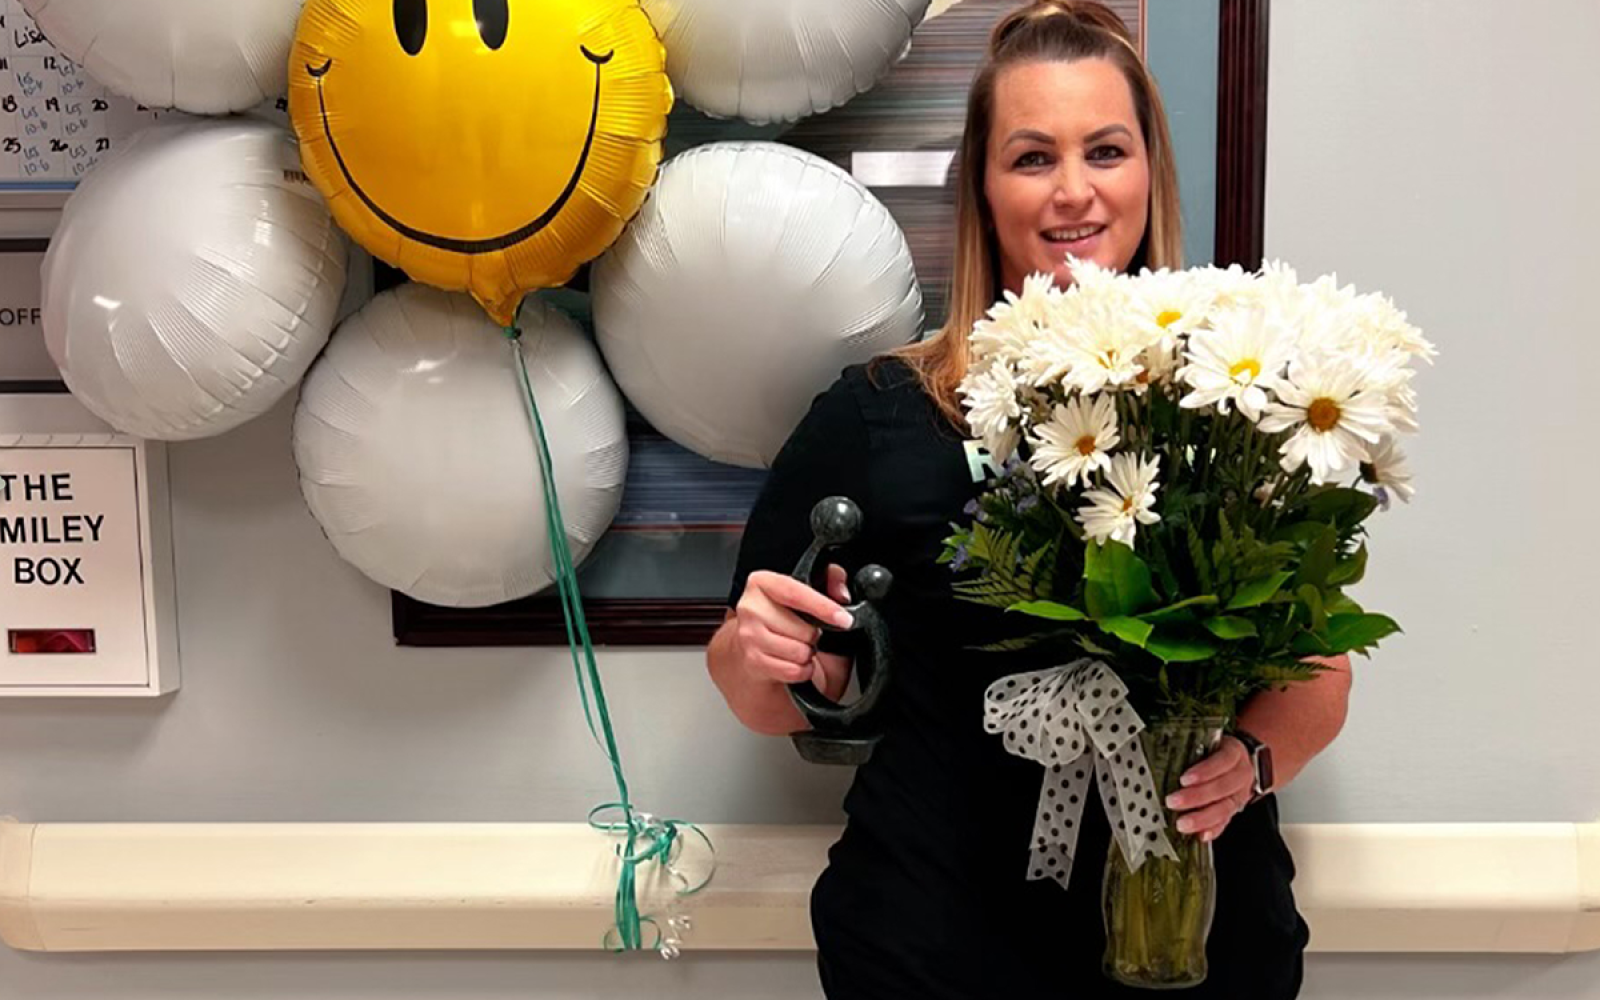 Lisa Sampson, RN of Nashville General Hospital was recently honored with The DAISY Award® For Extraordinary Nurses.